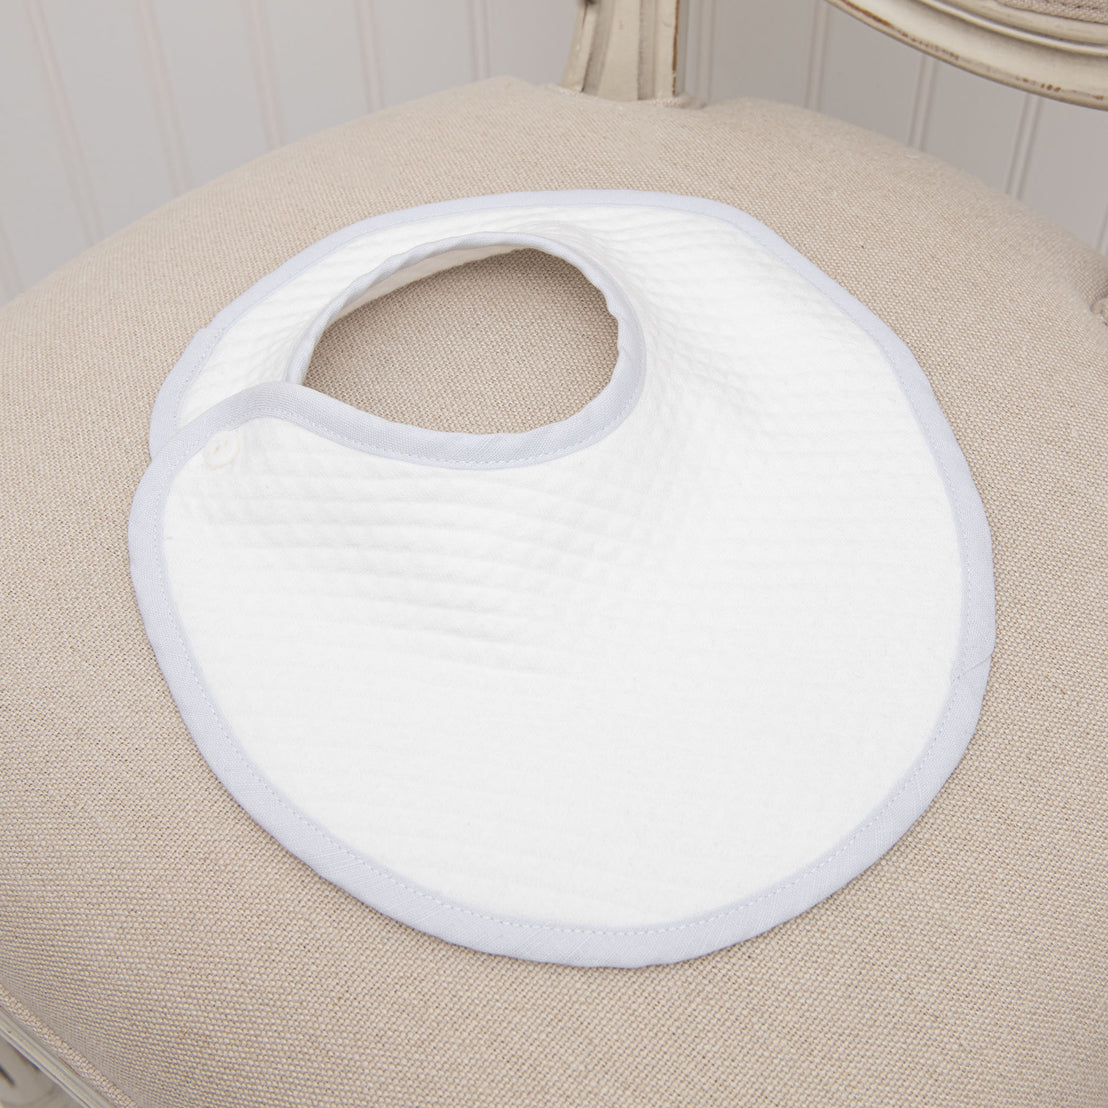 Flat of the Harrison Bib made with a very soft textured white cotton and features blue linen binding around the perimeter